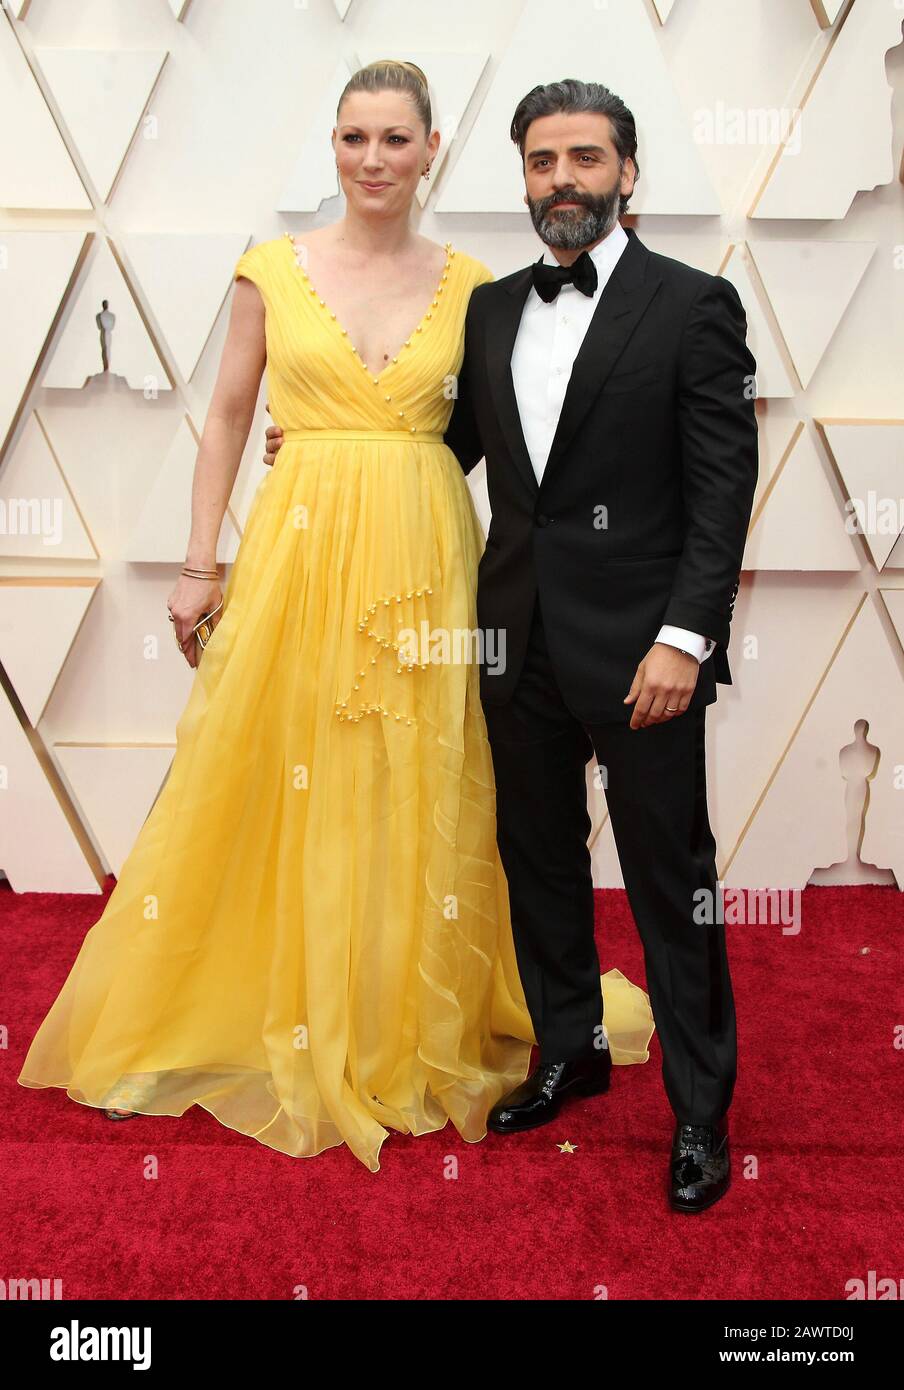 09 February 2020 - Hollywood, California - Elvira Lind, Oscar Isaac. 92nd Annual Academy Awards presented by the Academy of Motion Picture Arts and Sciences held at Hollywood & Highland Center. (Credit Image: © AdMedia via ZUMA Wire) Stock Photo